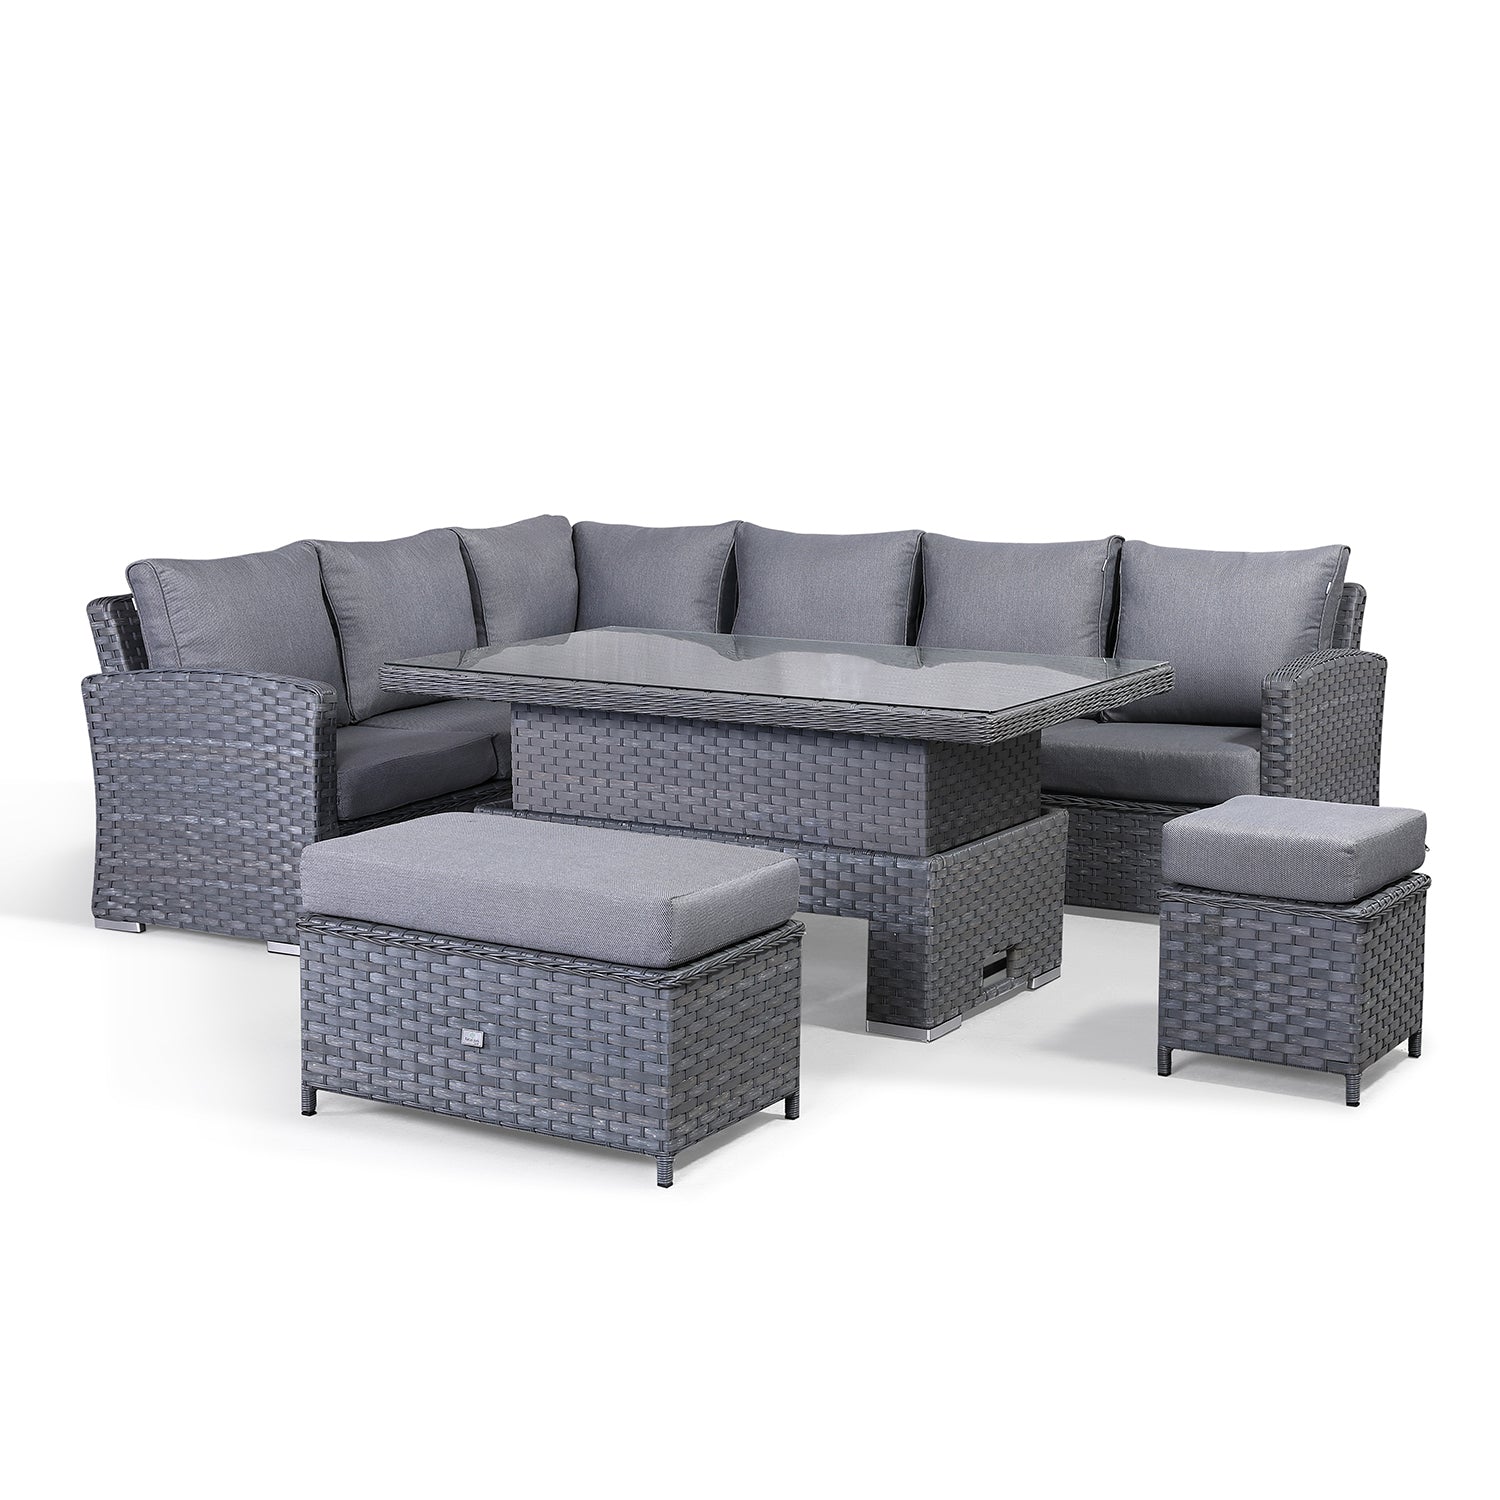 Rattan Park Victoria High Back Large MODULAR Corner Sofa Set with Rising Table in Slate Grey Weave